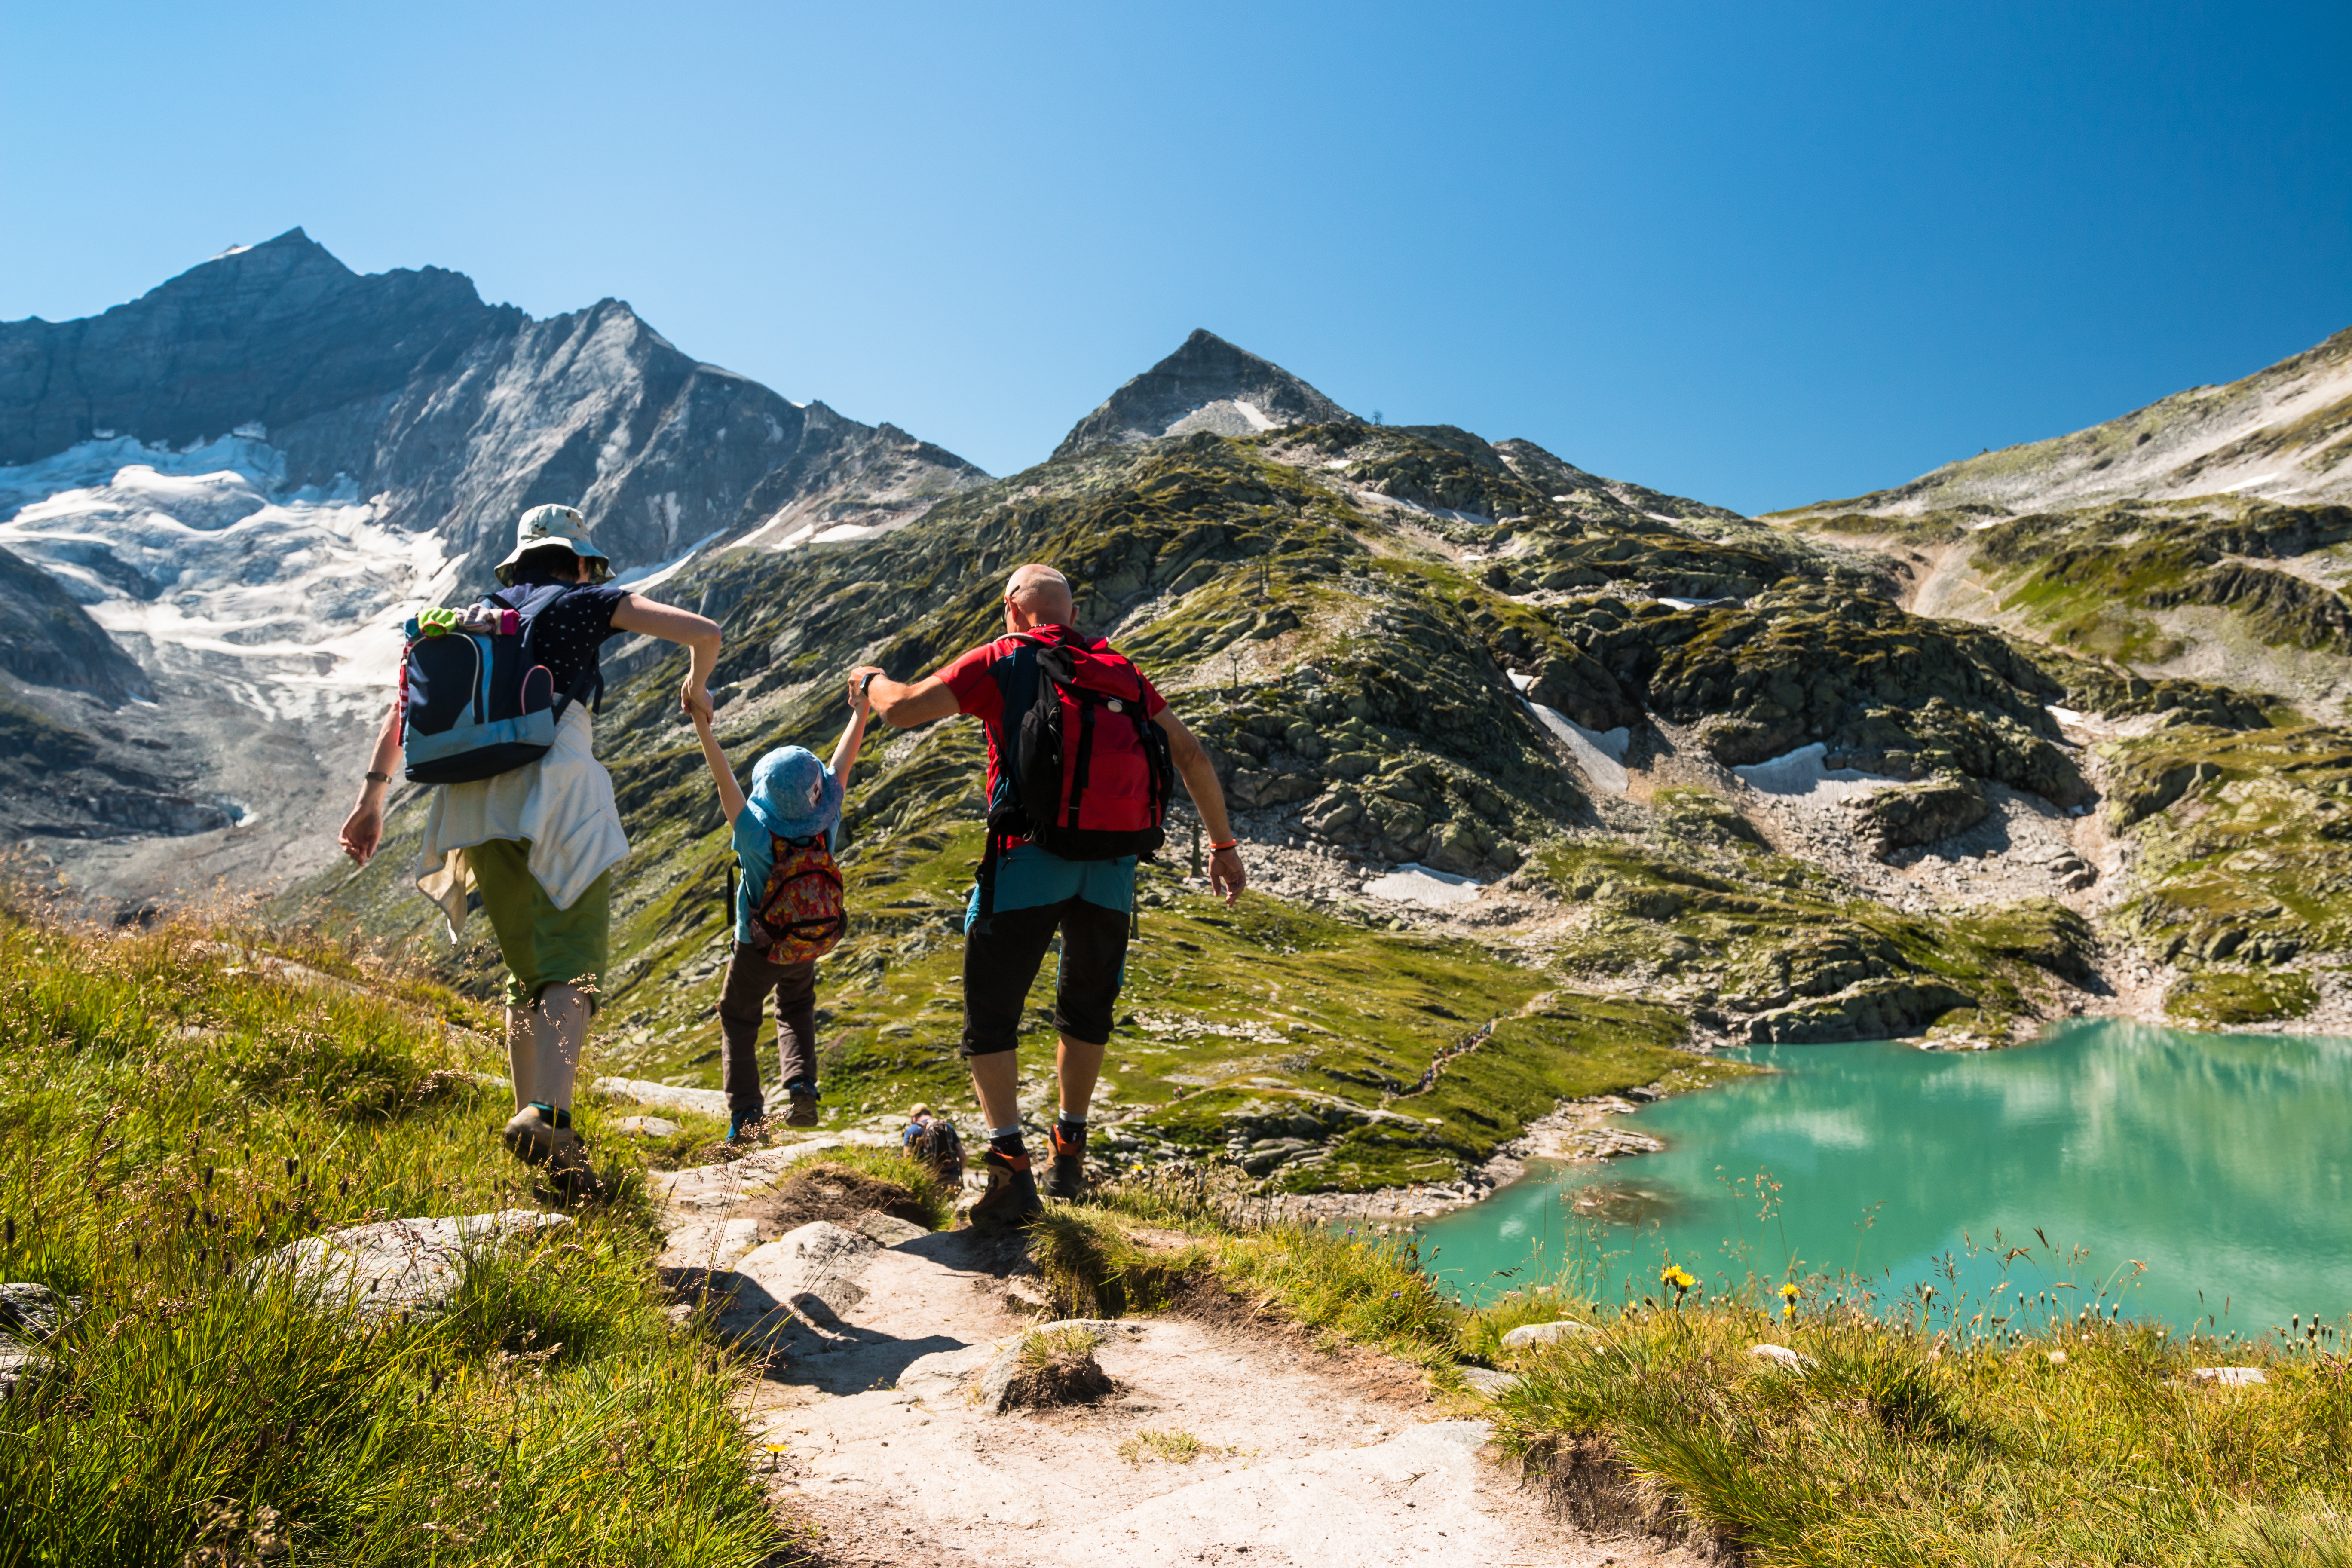 If you enjoy hiking as a hobby, then you may like some of these communities that embrace hiking in their lifestyle.